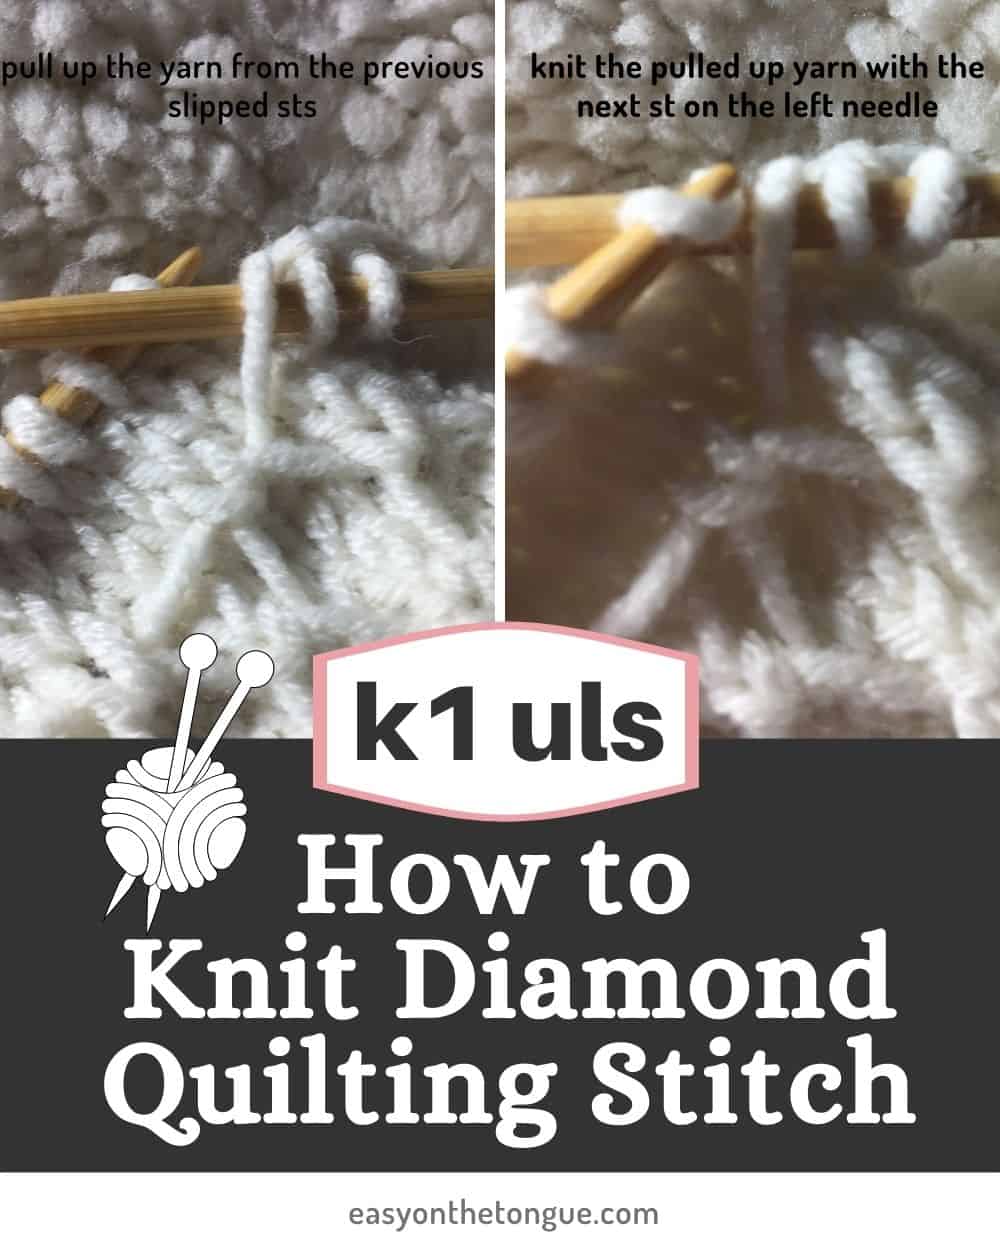 How to k1 uls used to knit Diamond Quilting. Knitting Pattern available on easyonthetongue.com FB Diamond Quilting Knit Stitch Pattern, an easy and striking pattern